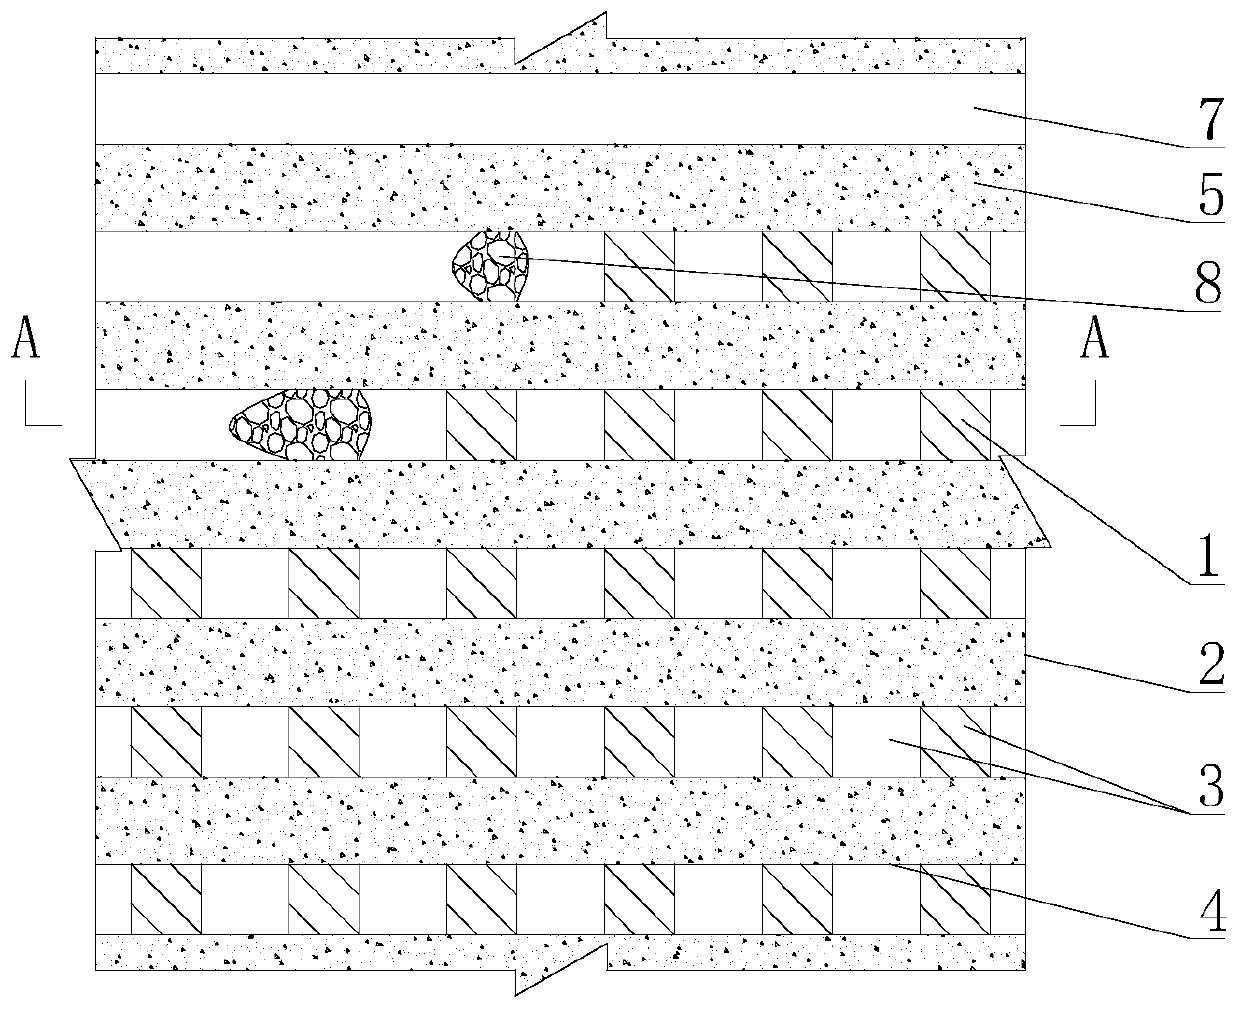 Continuous slitting bag-filling room-and-pillar method back-mining pillar method in empty area